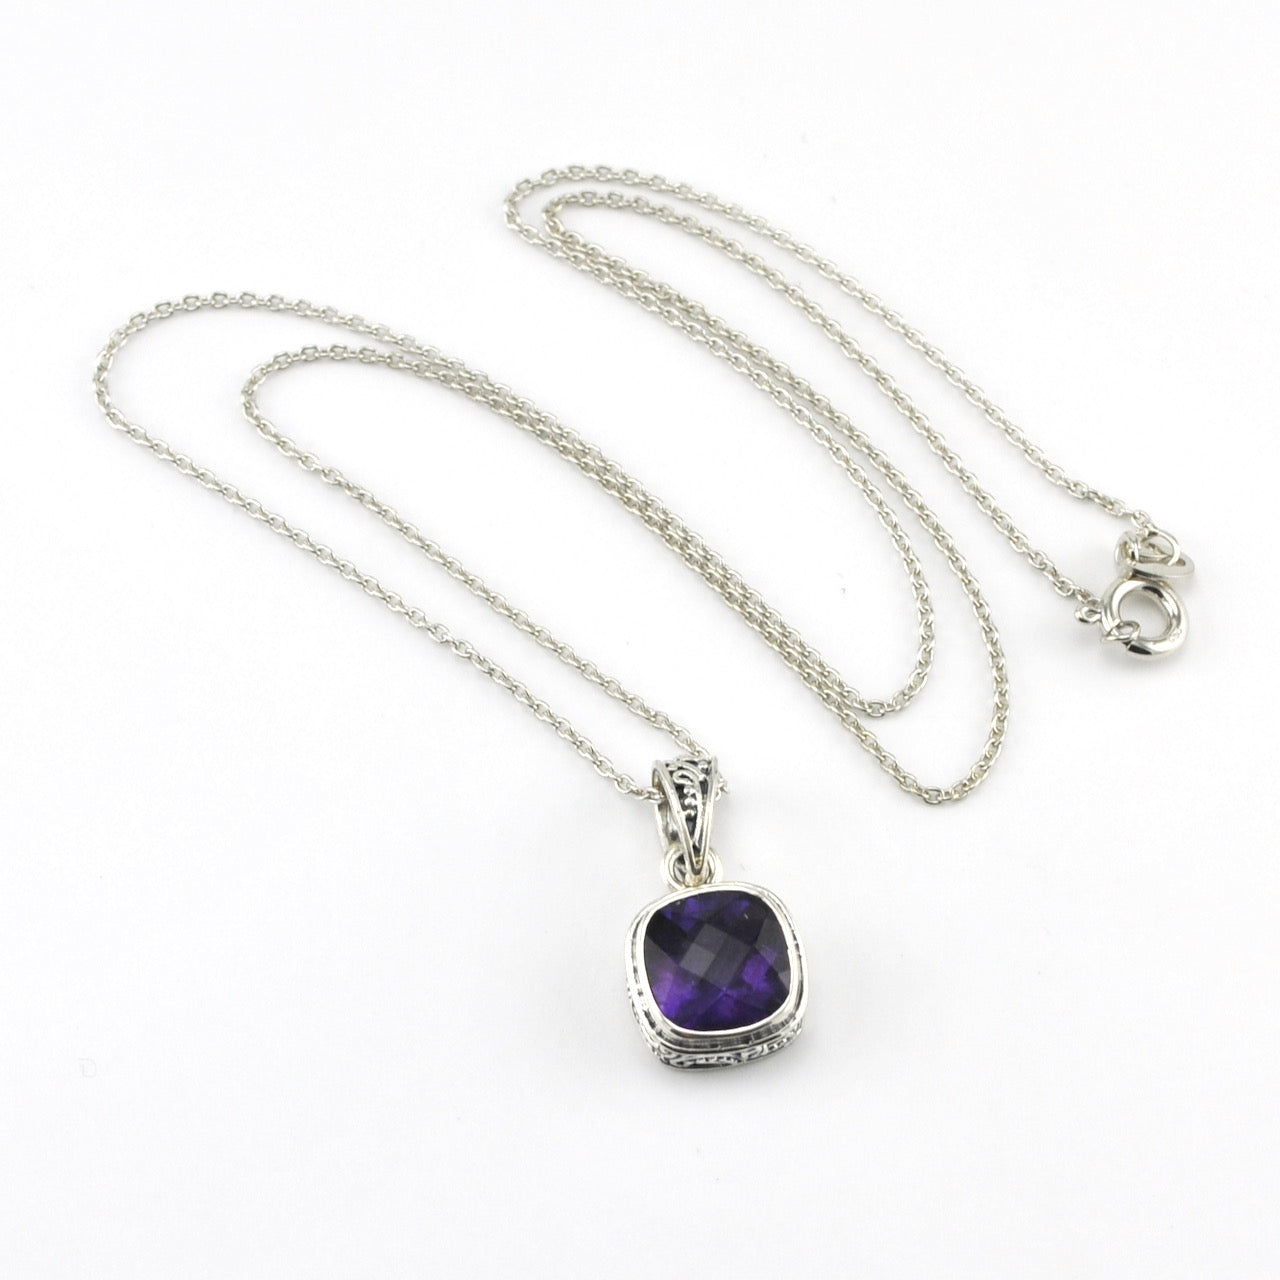 Silver Amethyst 9mm Square Bali Necklace